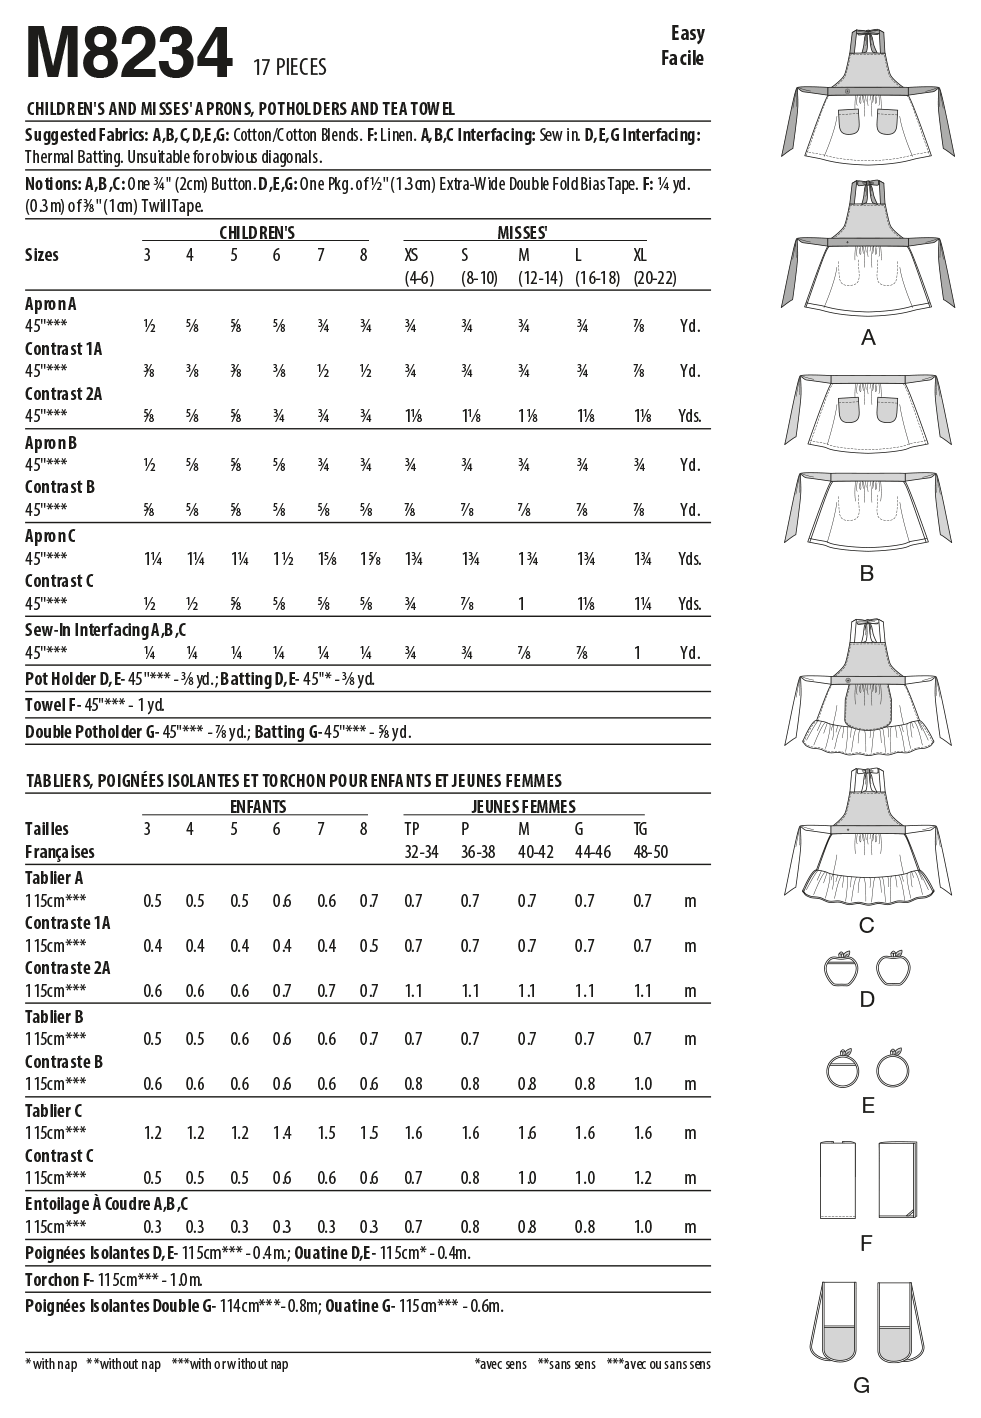 McCall's 8234 Children's and Misses' Aprons, Potholders and Tea Towel